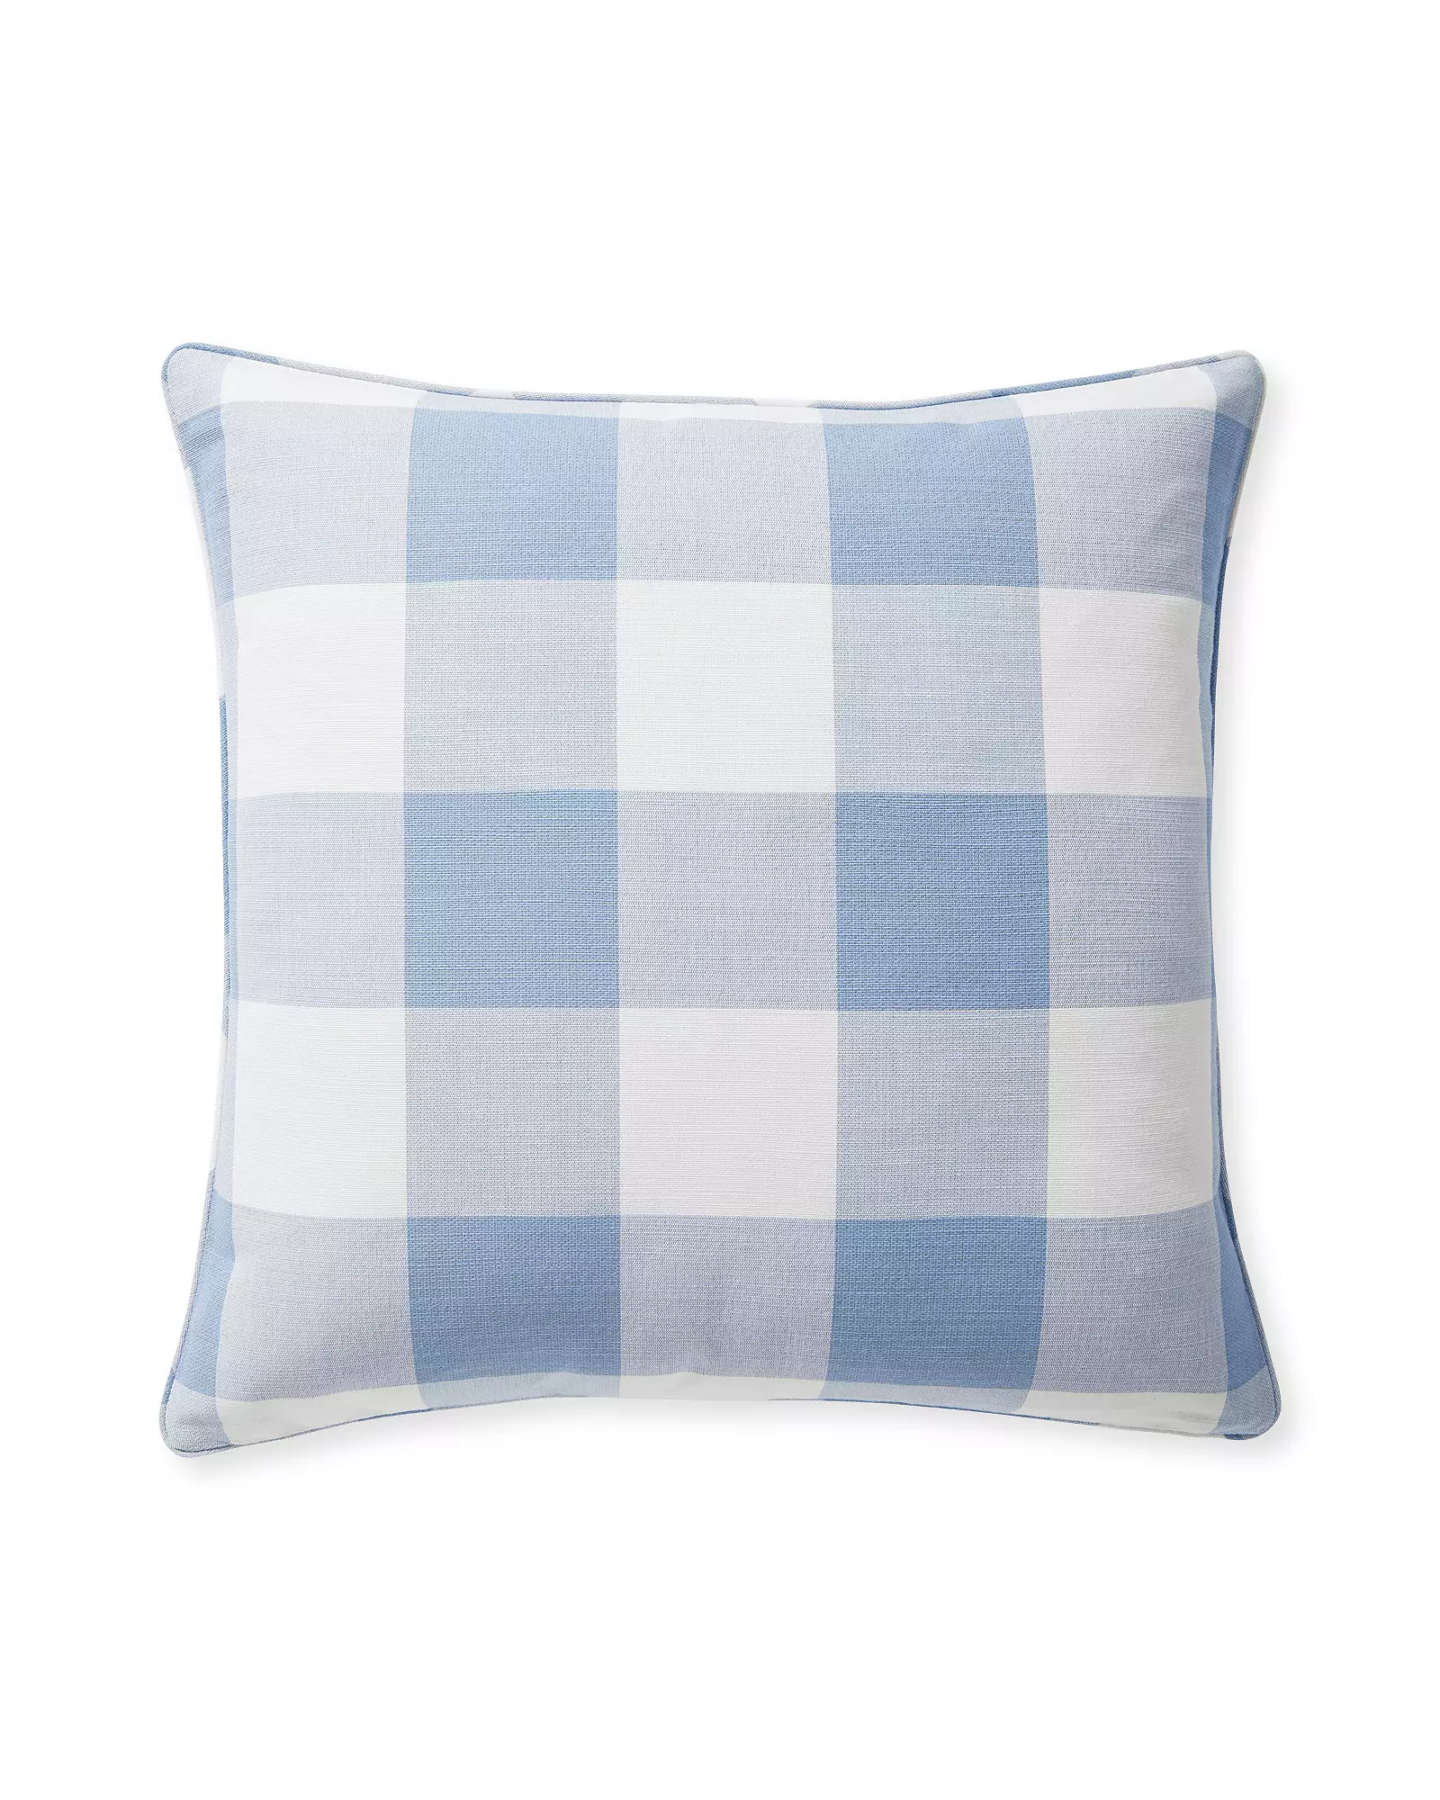 Blue and white gingham pillow, Serena & Lily